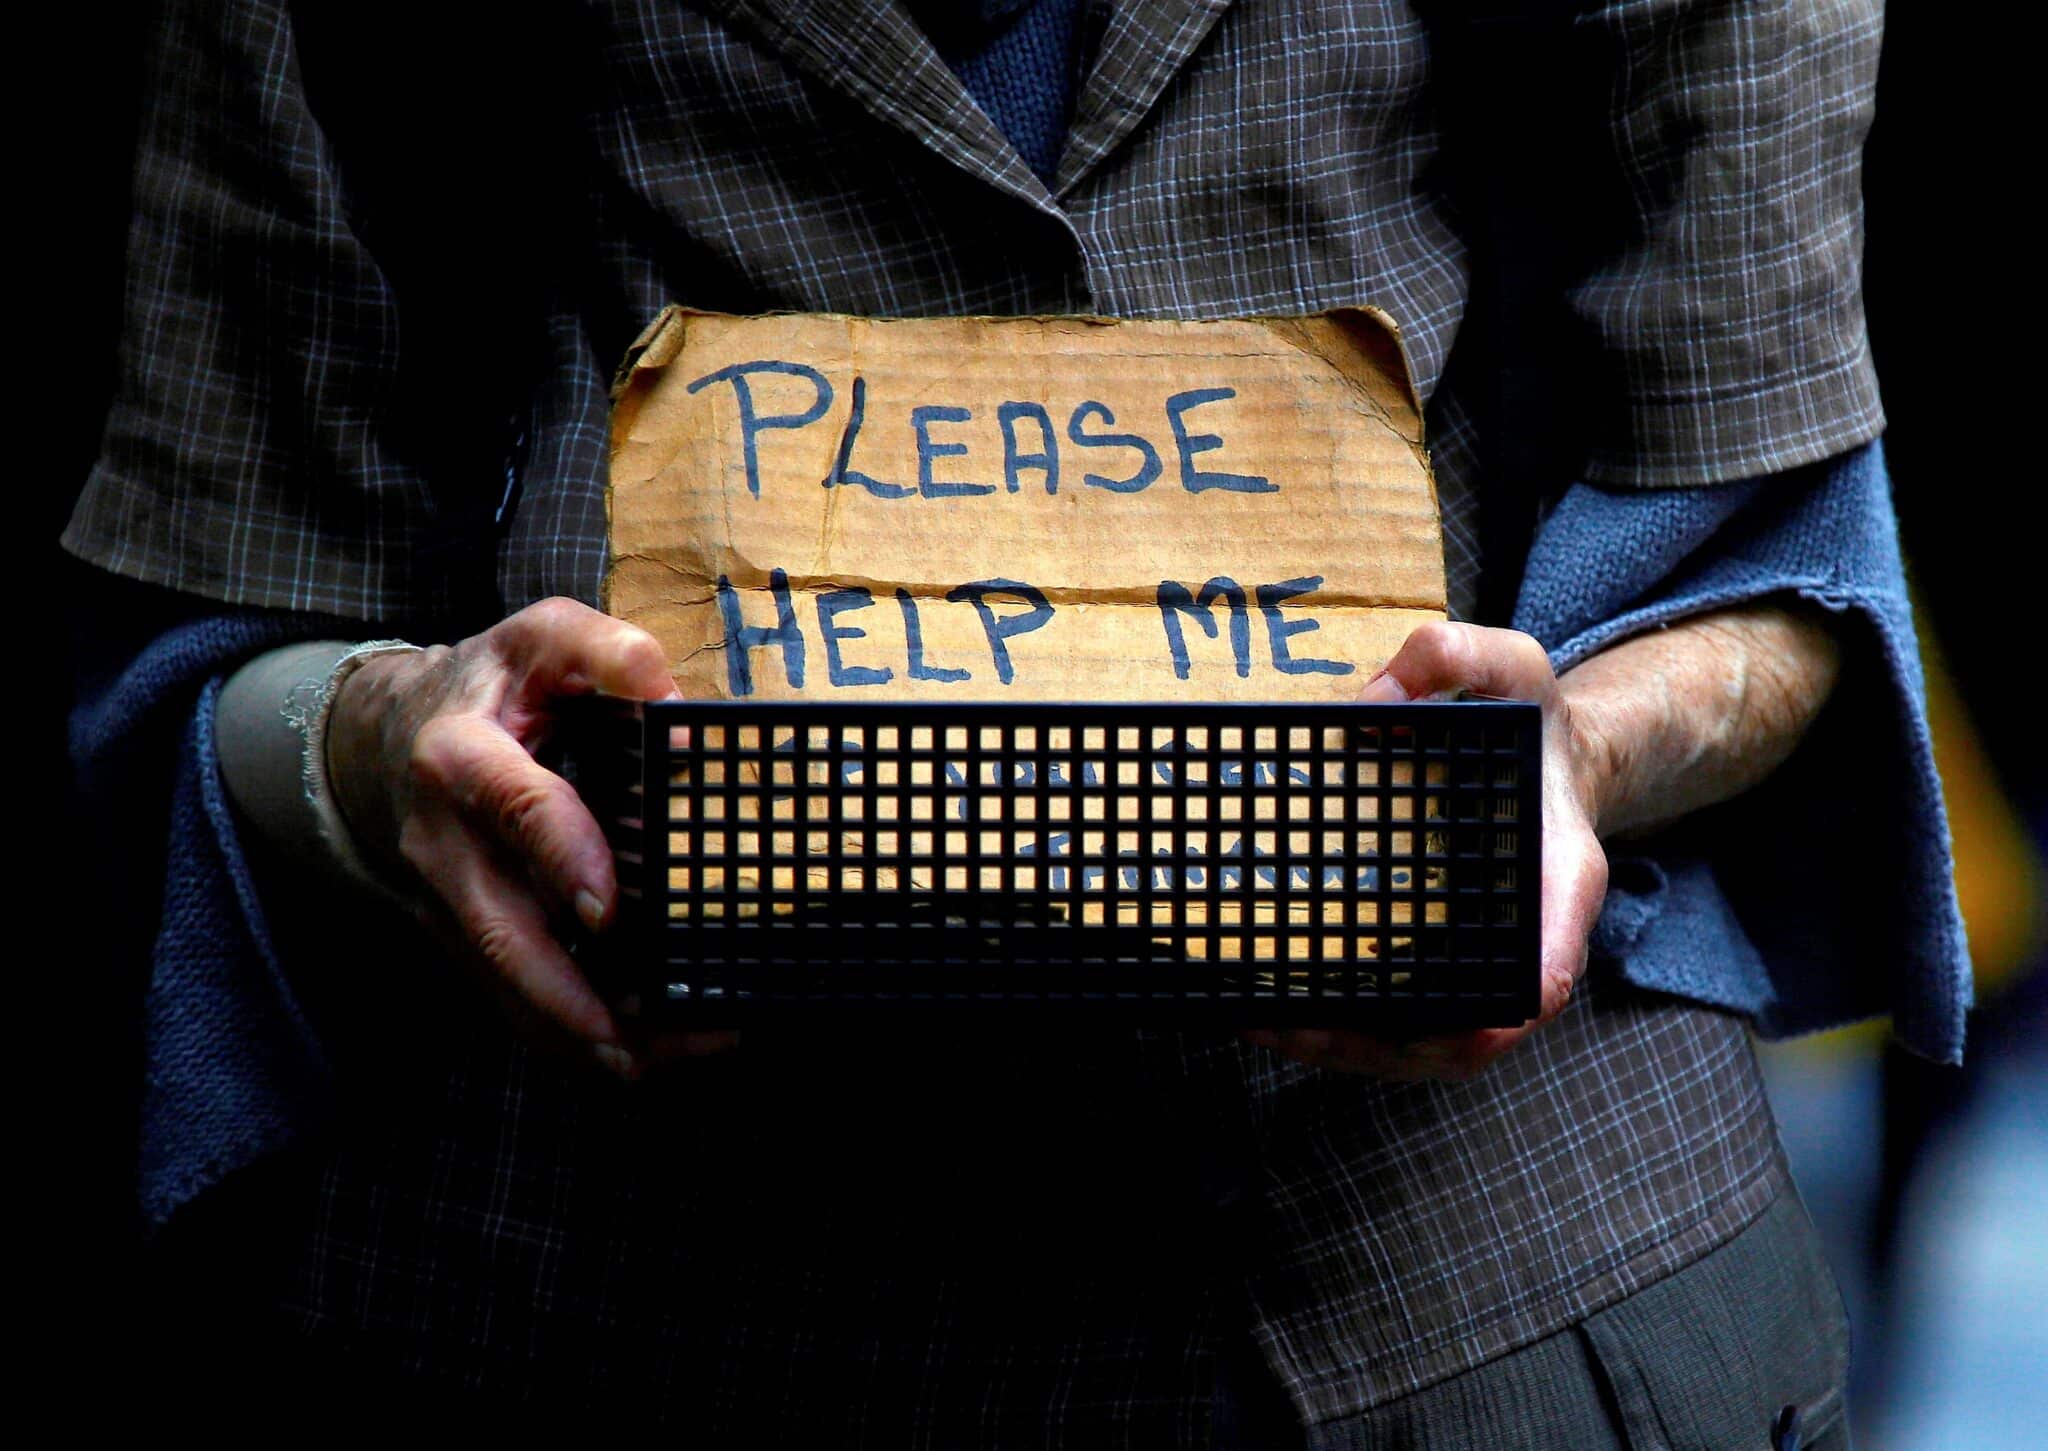 A homeless woman holds a container bearing a sign reading "Please Help Me" as she begs for money on a street in Sydney Oct. 28, 2016. In a pre-election statement, Australian bishops did not endorse an political platform, but said voters should consider candidates who might prioritize people who need palliative care, those in low-paying and insecure jobs, First Nations peoples, asylum-seekers and refugees. (CNS photo/David Gray, Reuters)